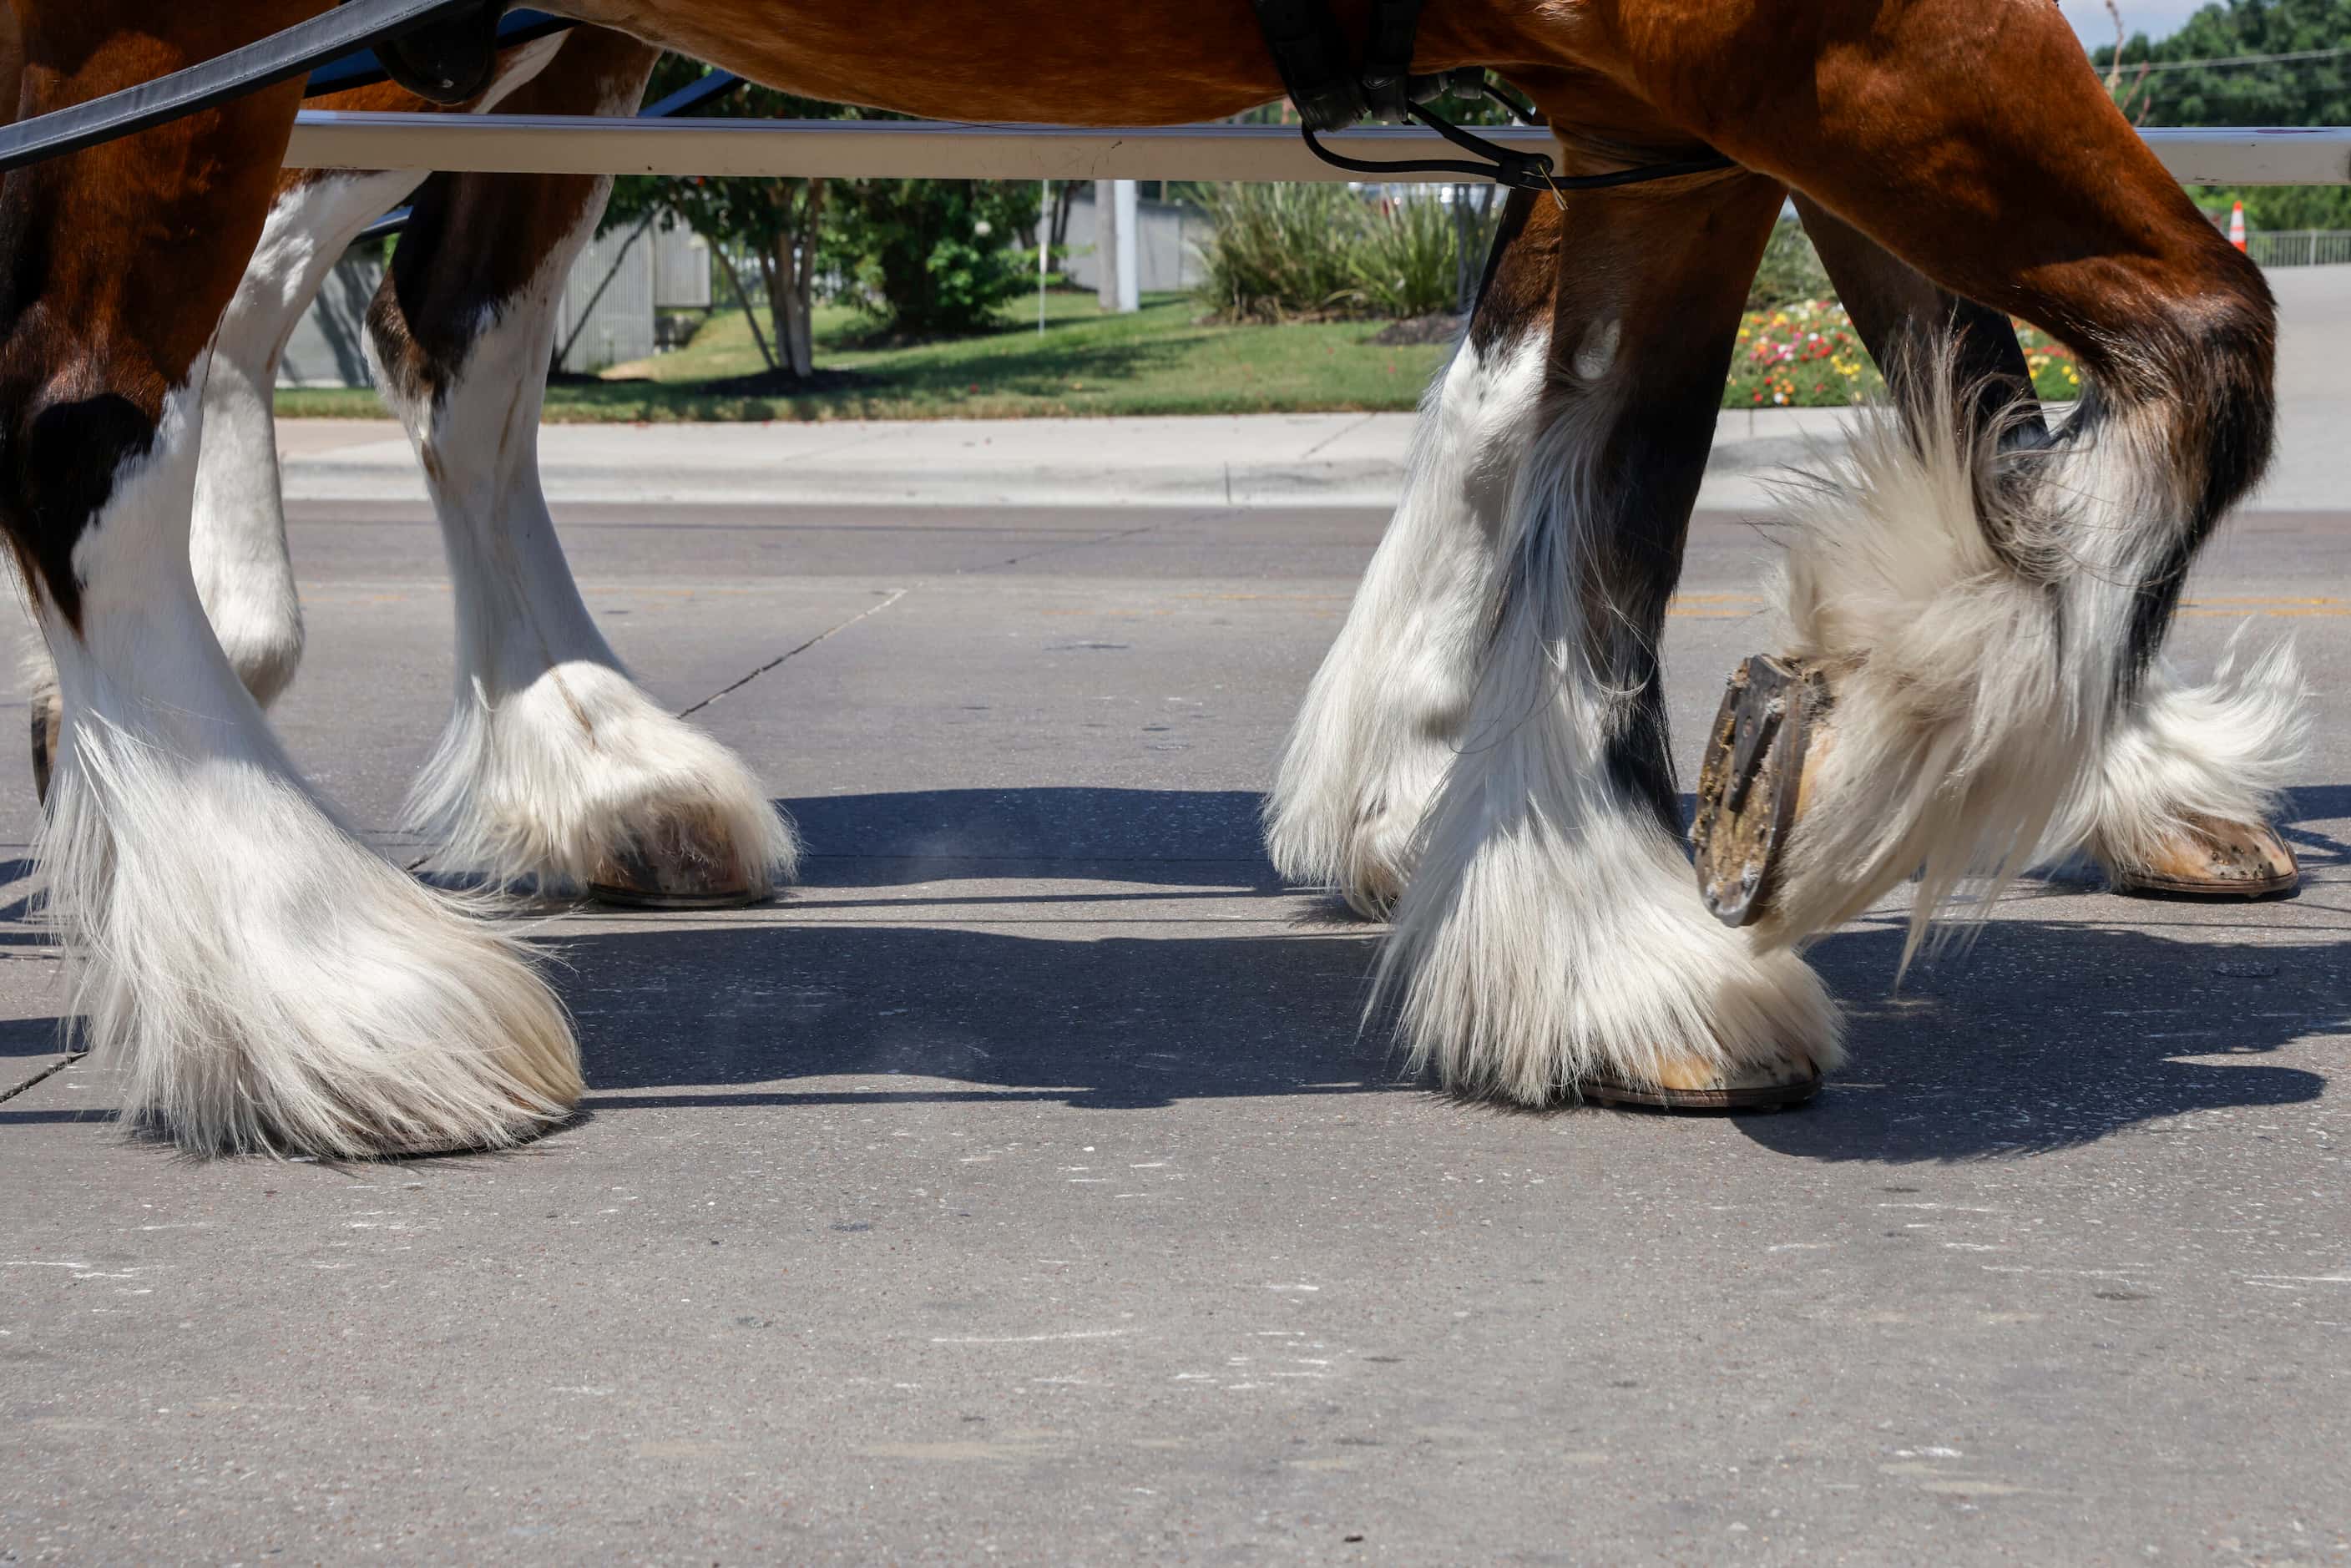 The Budweiser Clydesdales trademark long white hair is seen as they make their way through...